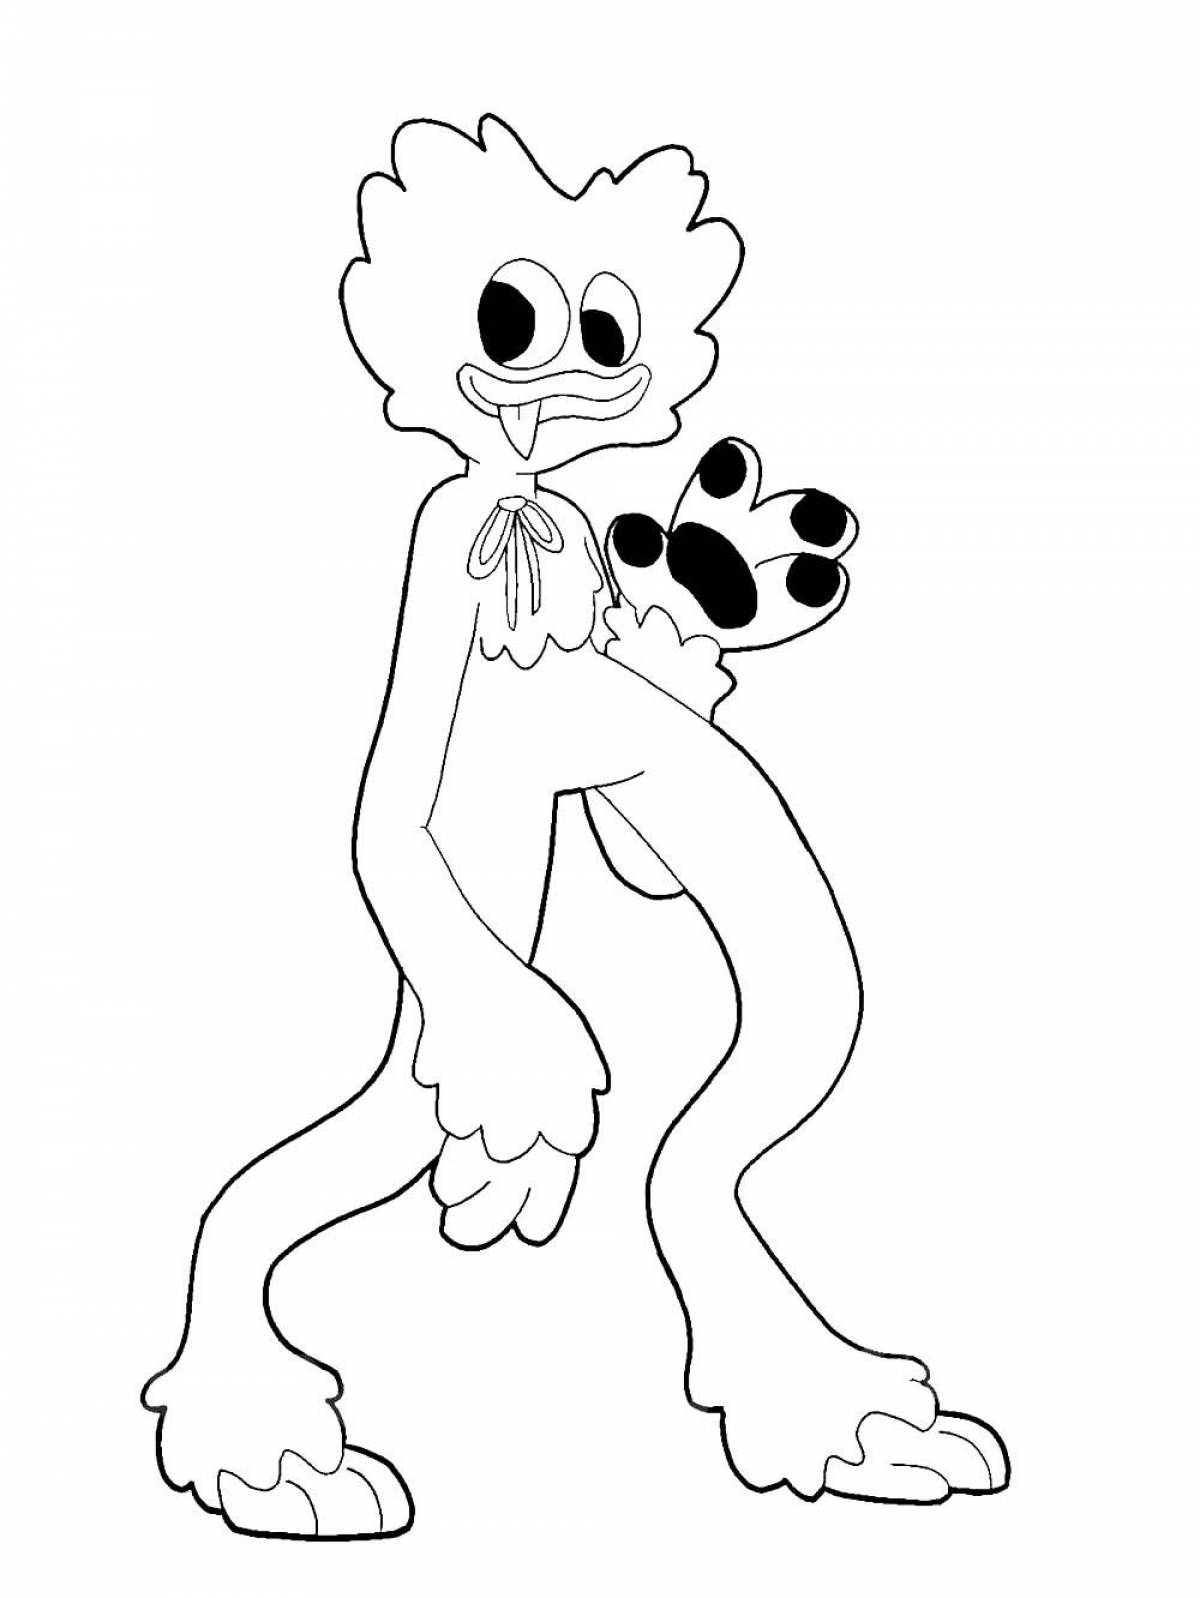 Lovely haggy waggie coloring page